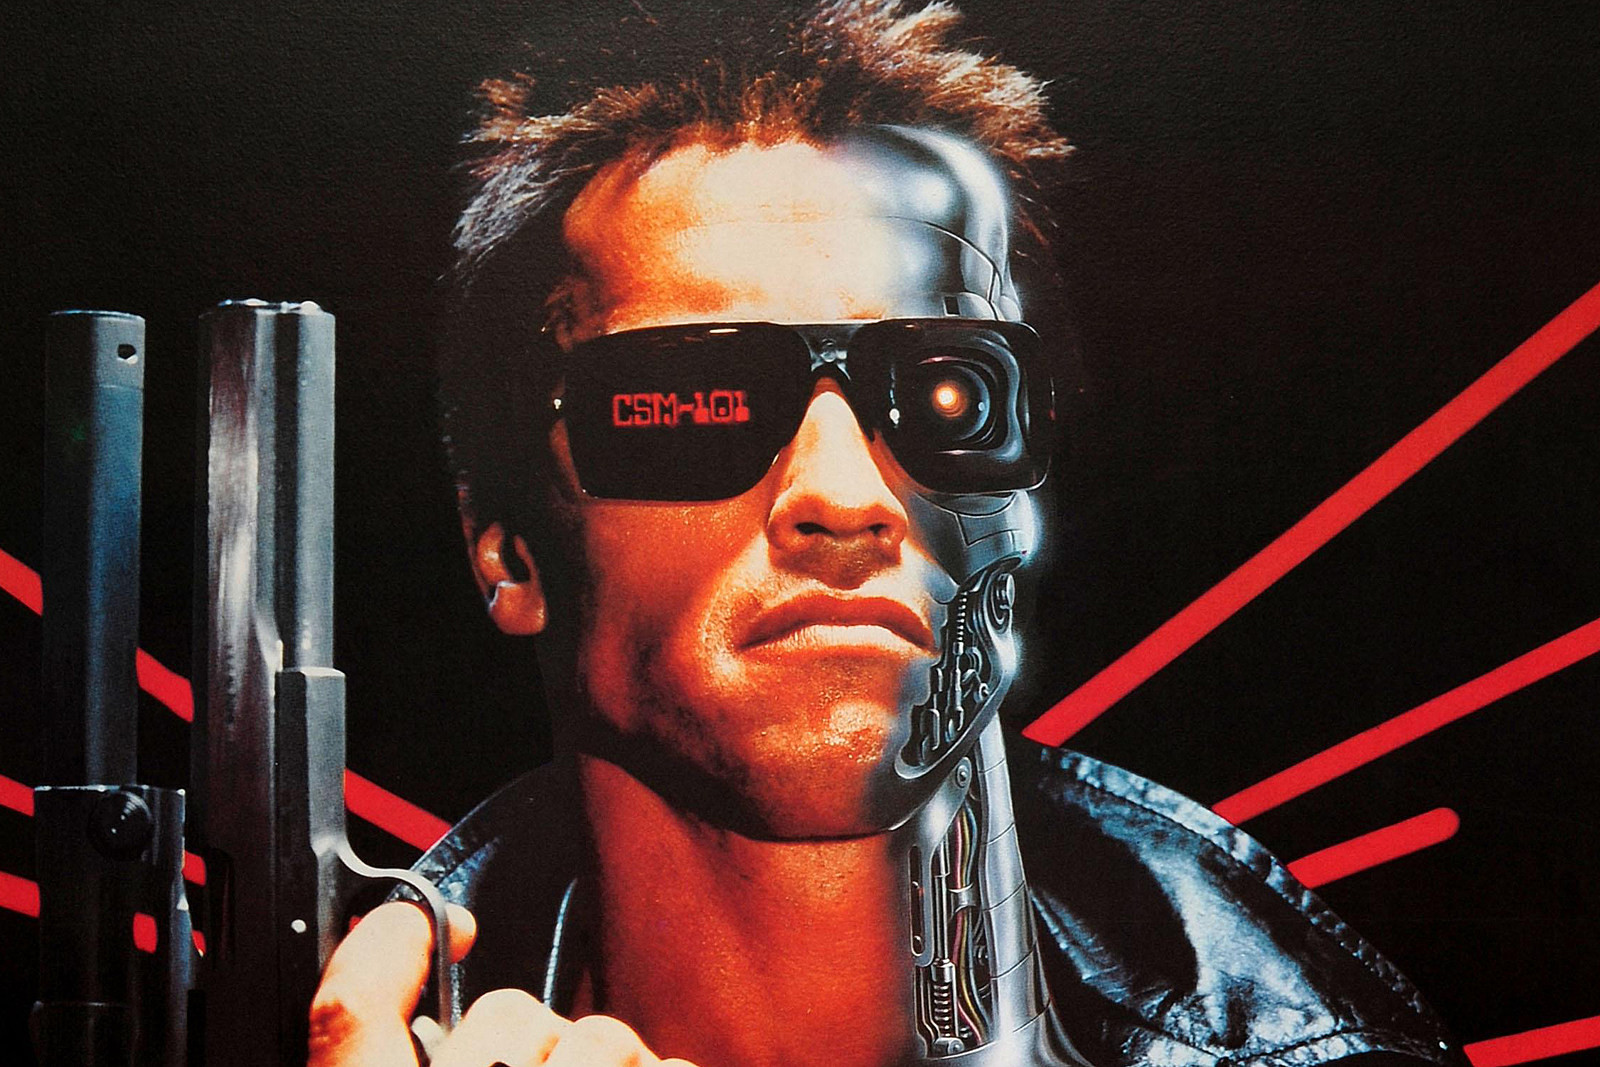 Terminator will be back with new anime series in the works at Netflix